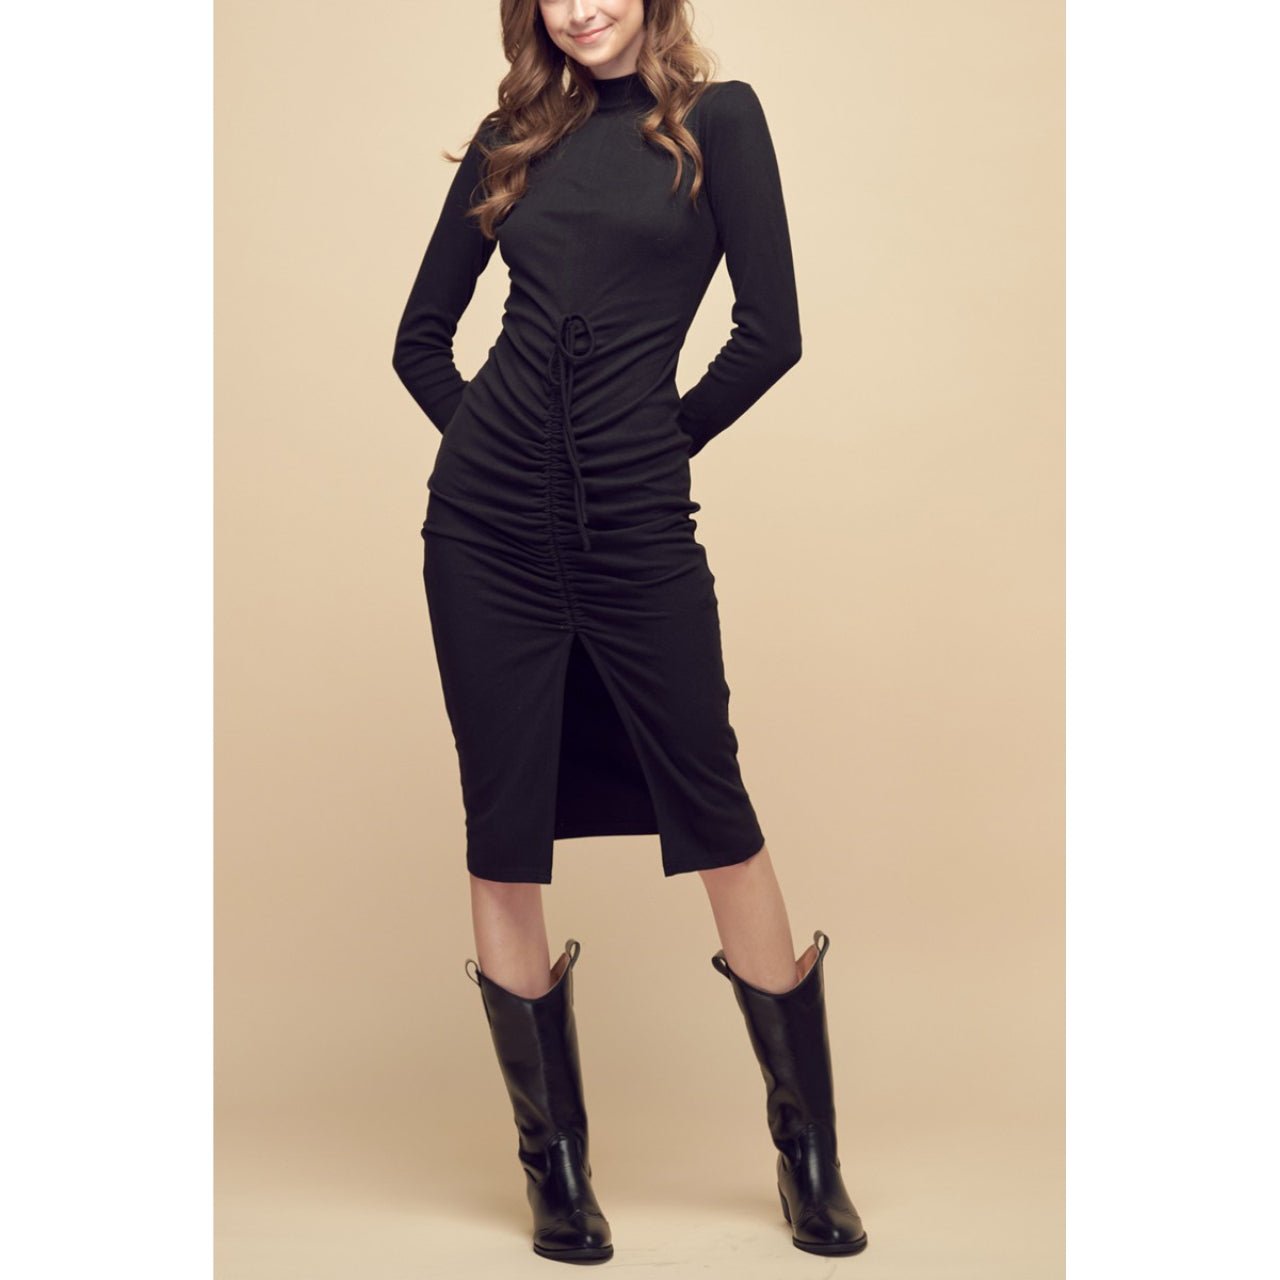 Hey Babe Mock Neck Long Sleeve Ruched Front Dress - The Graphic Tee